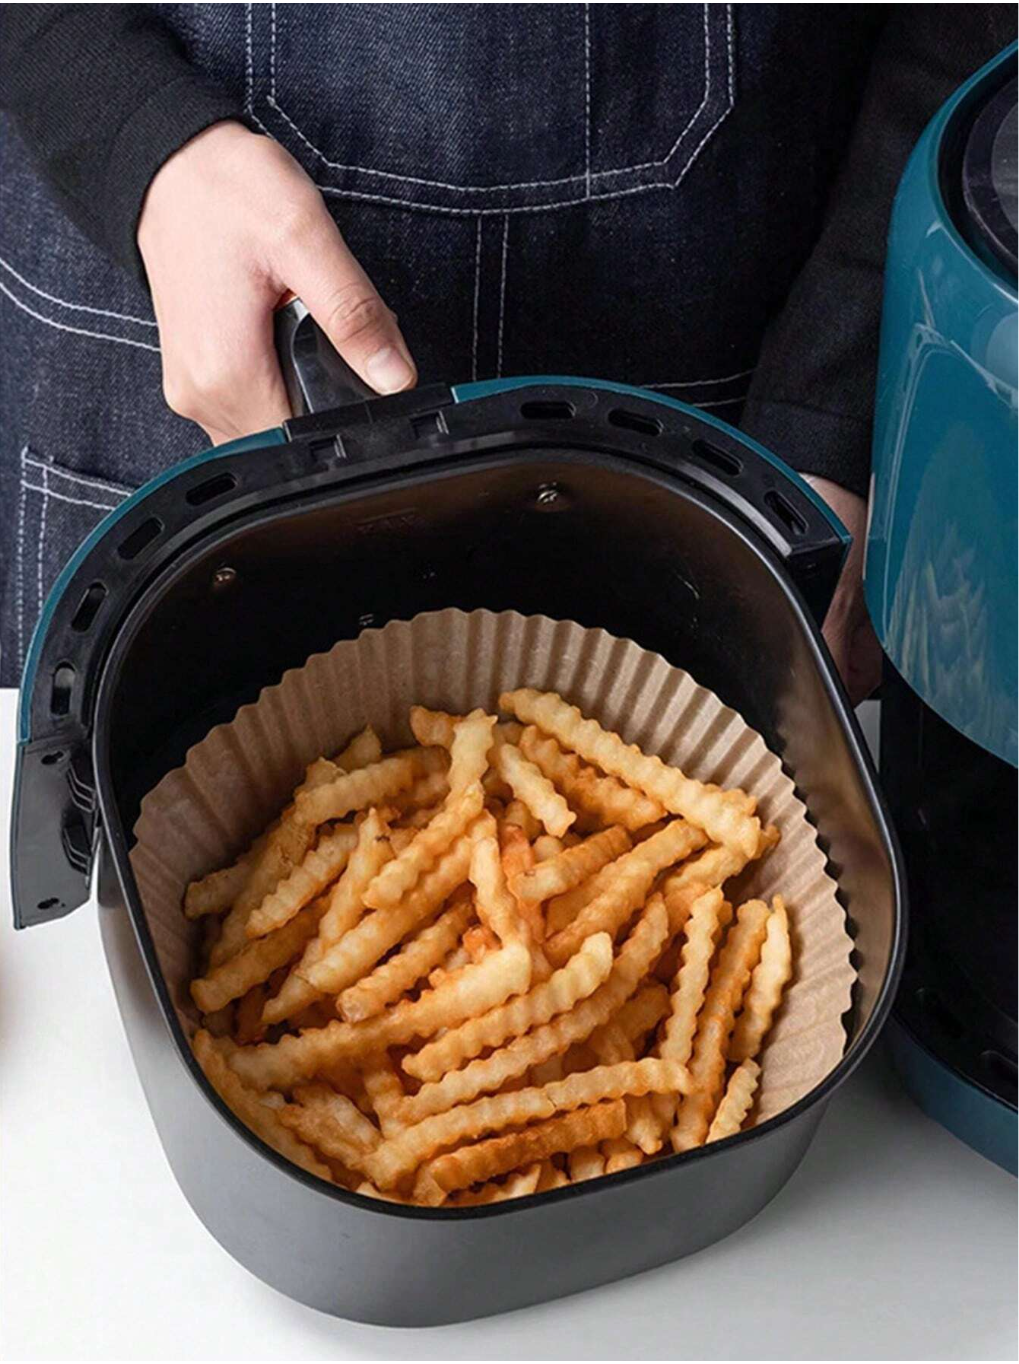 Culinary Convenience: 25pcs/50pcs Round Air Fryer Liners – Silicone Oil-Proof Paper for Mess-Free Baking and Grilling in Your Home Kitchen!